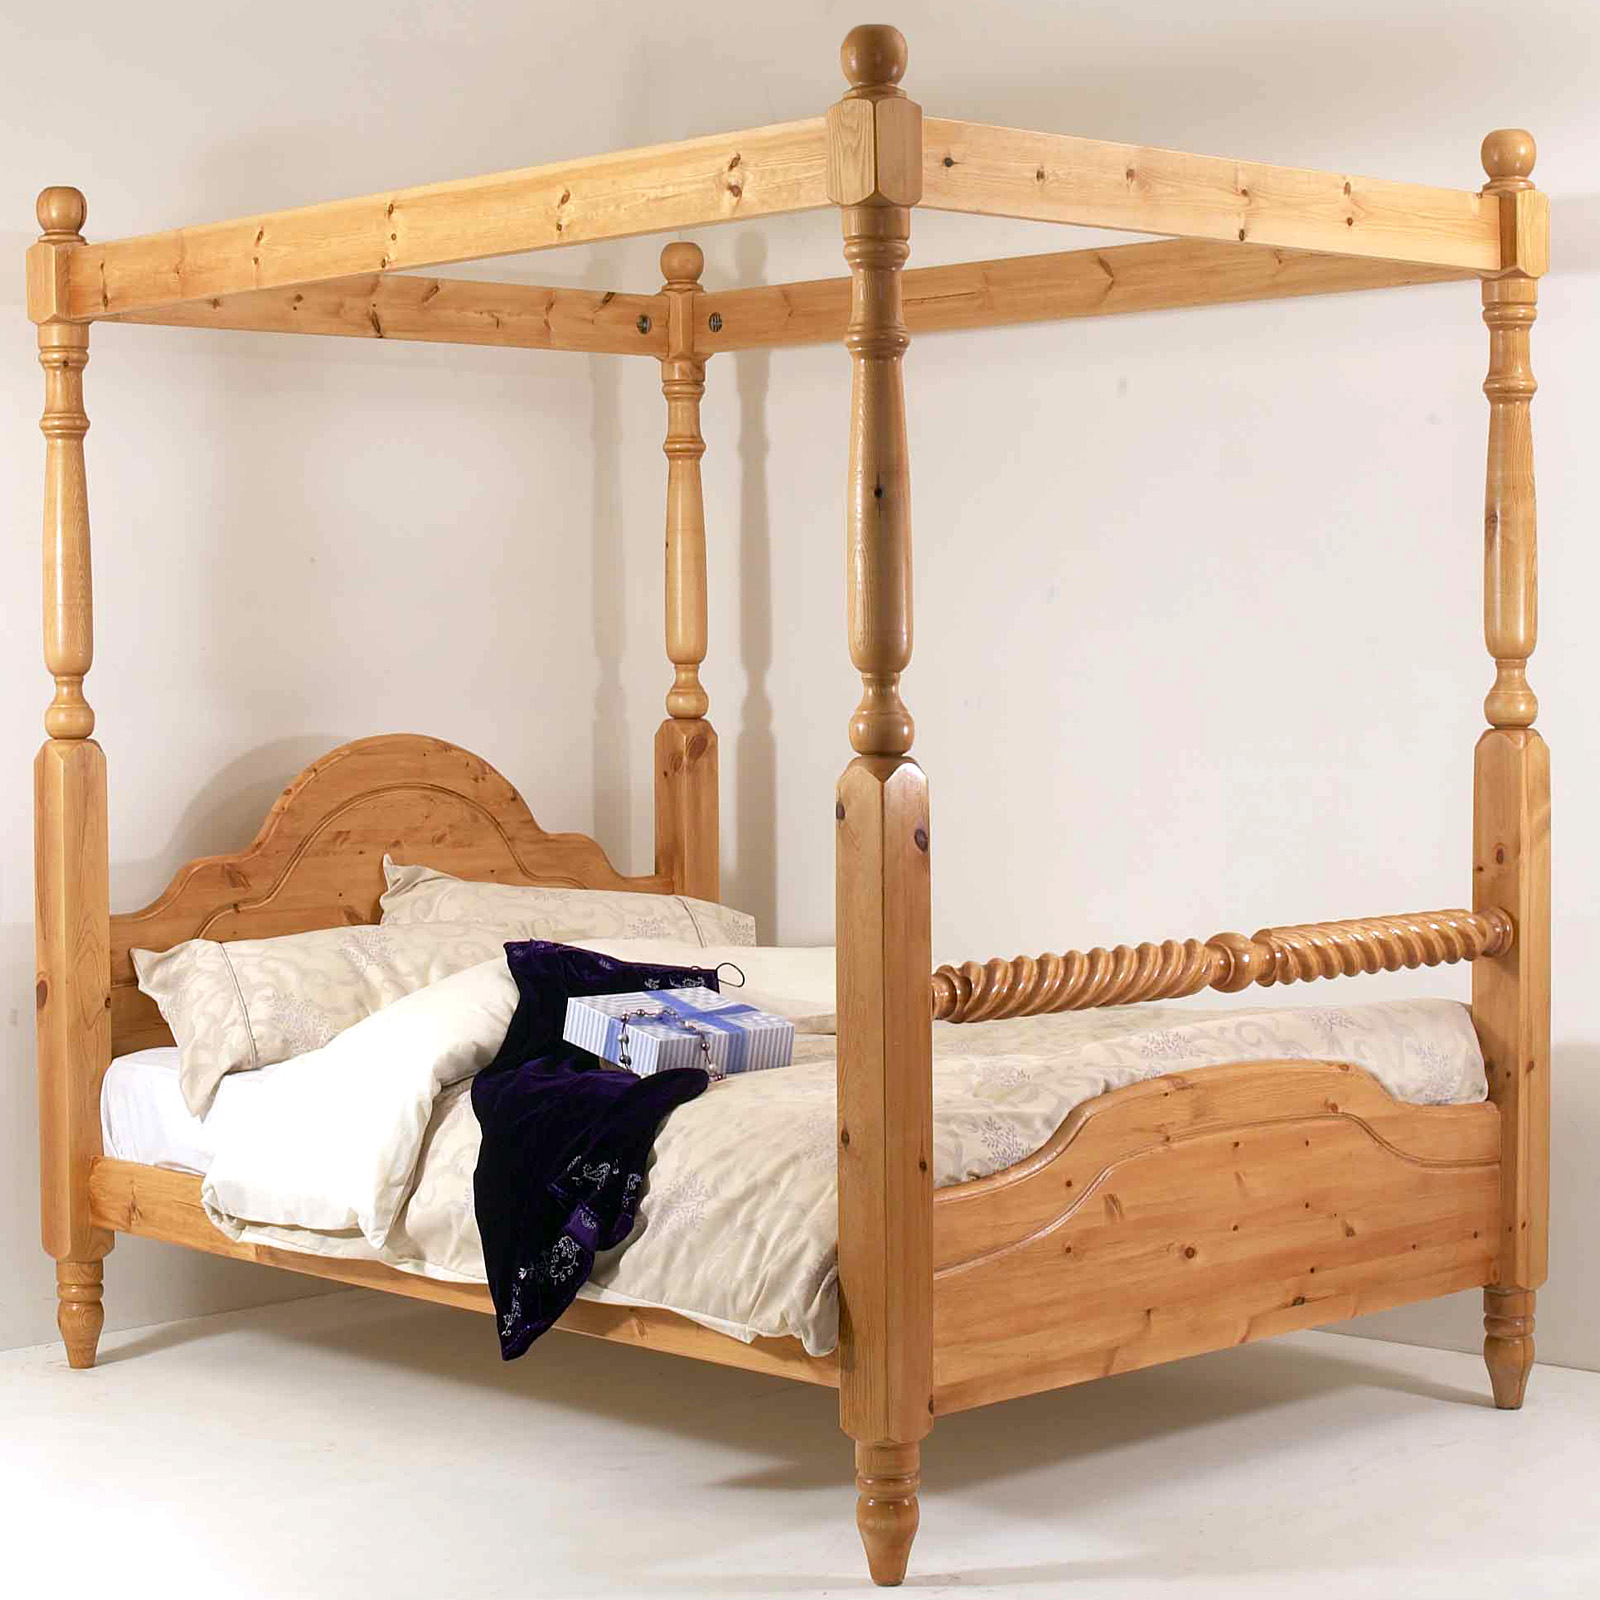 6ft Classic Rail Four Poster Bed Super, Super King Bed 4 Poster